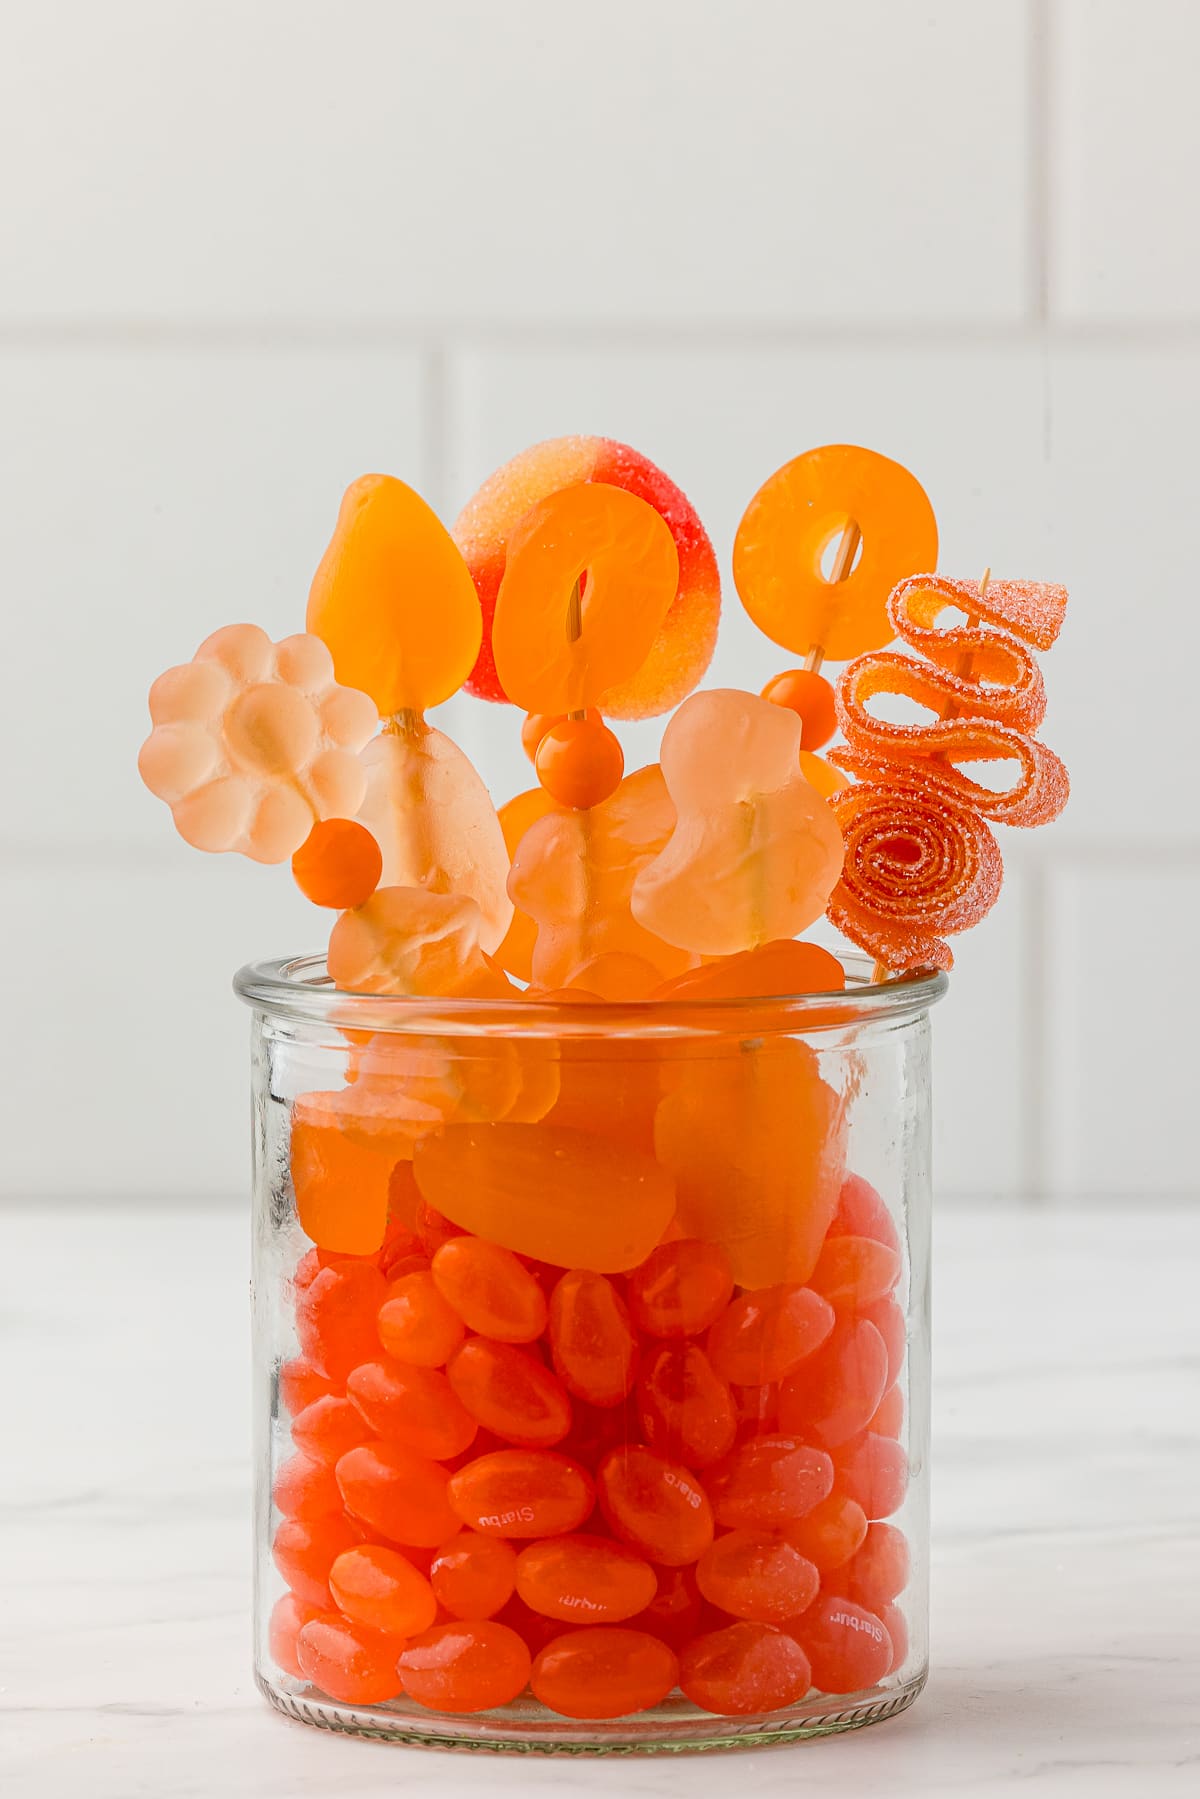 Orange jelly beans in a small jar with orange candy kabobs made with orange gummy candy bought at Five Below on a white countertop.